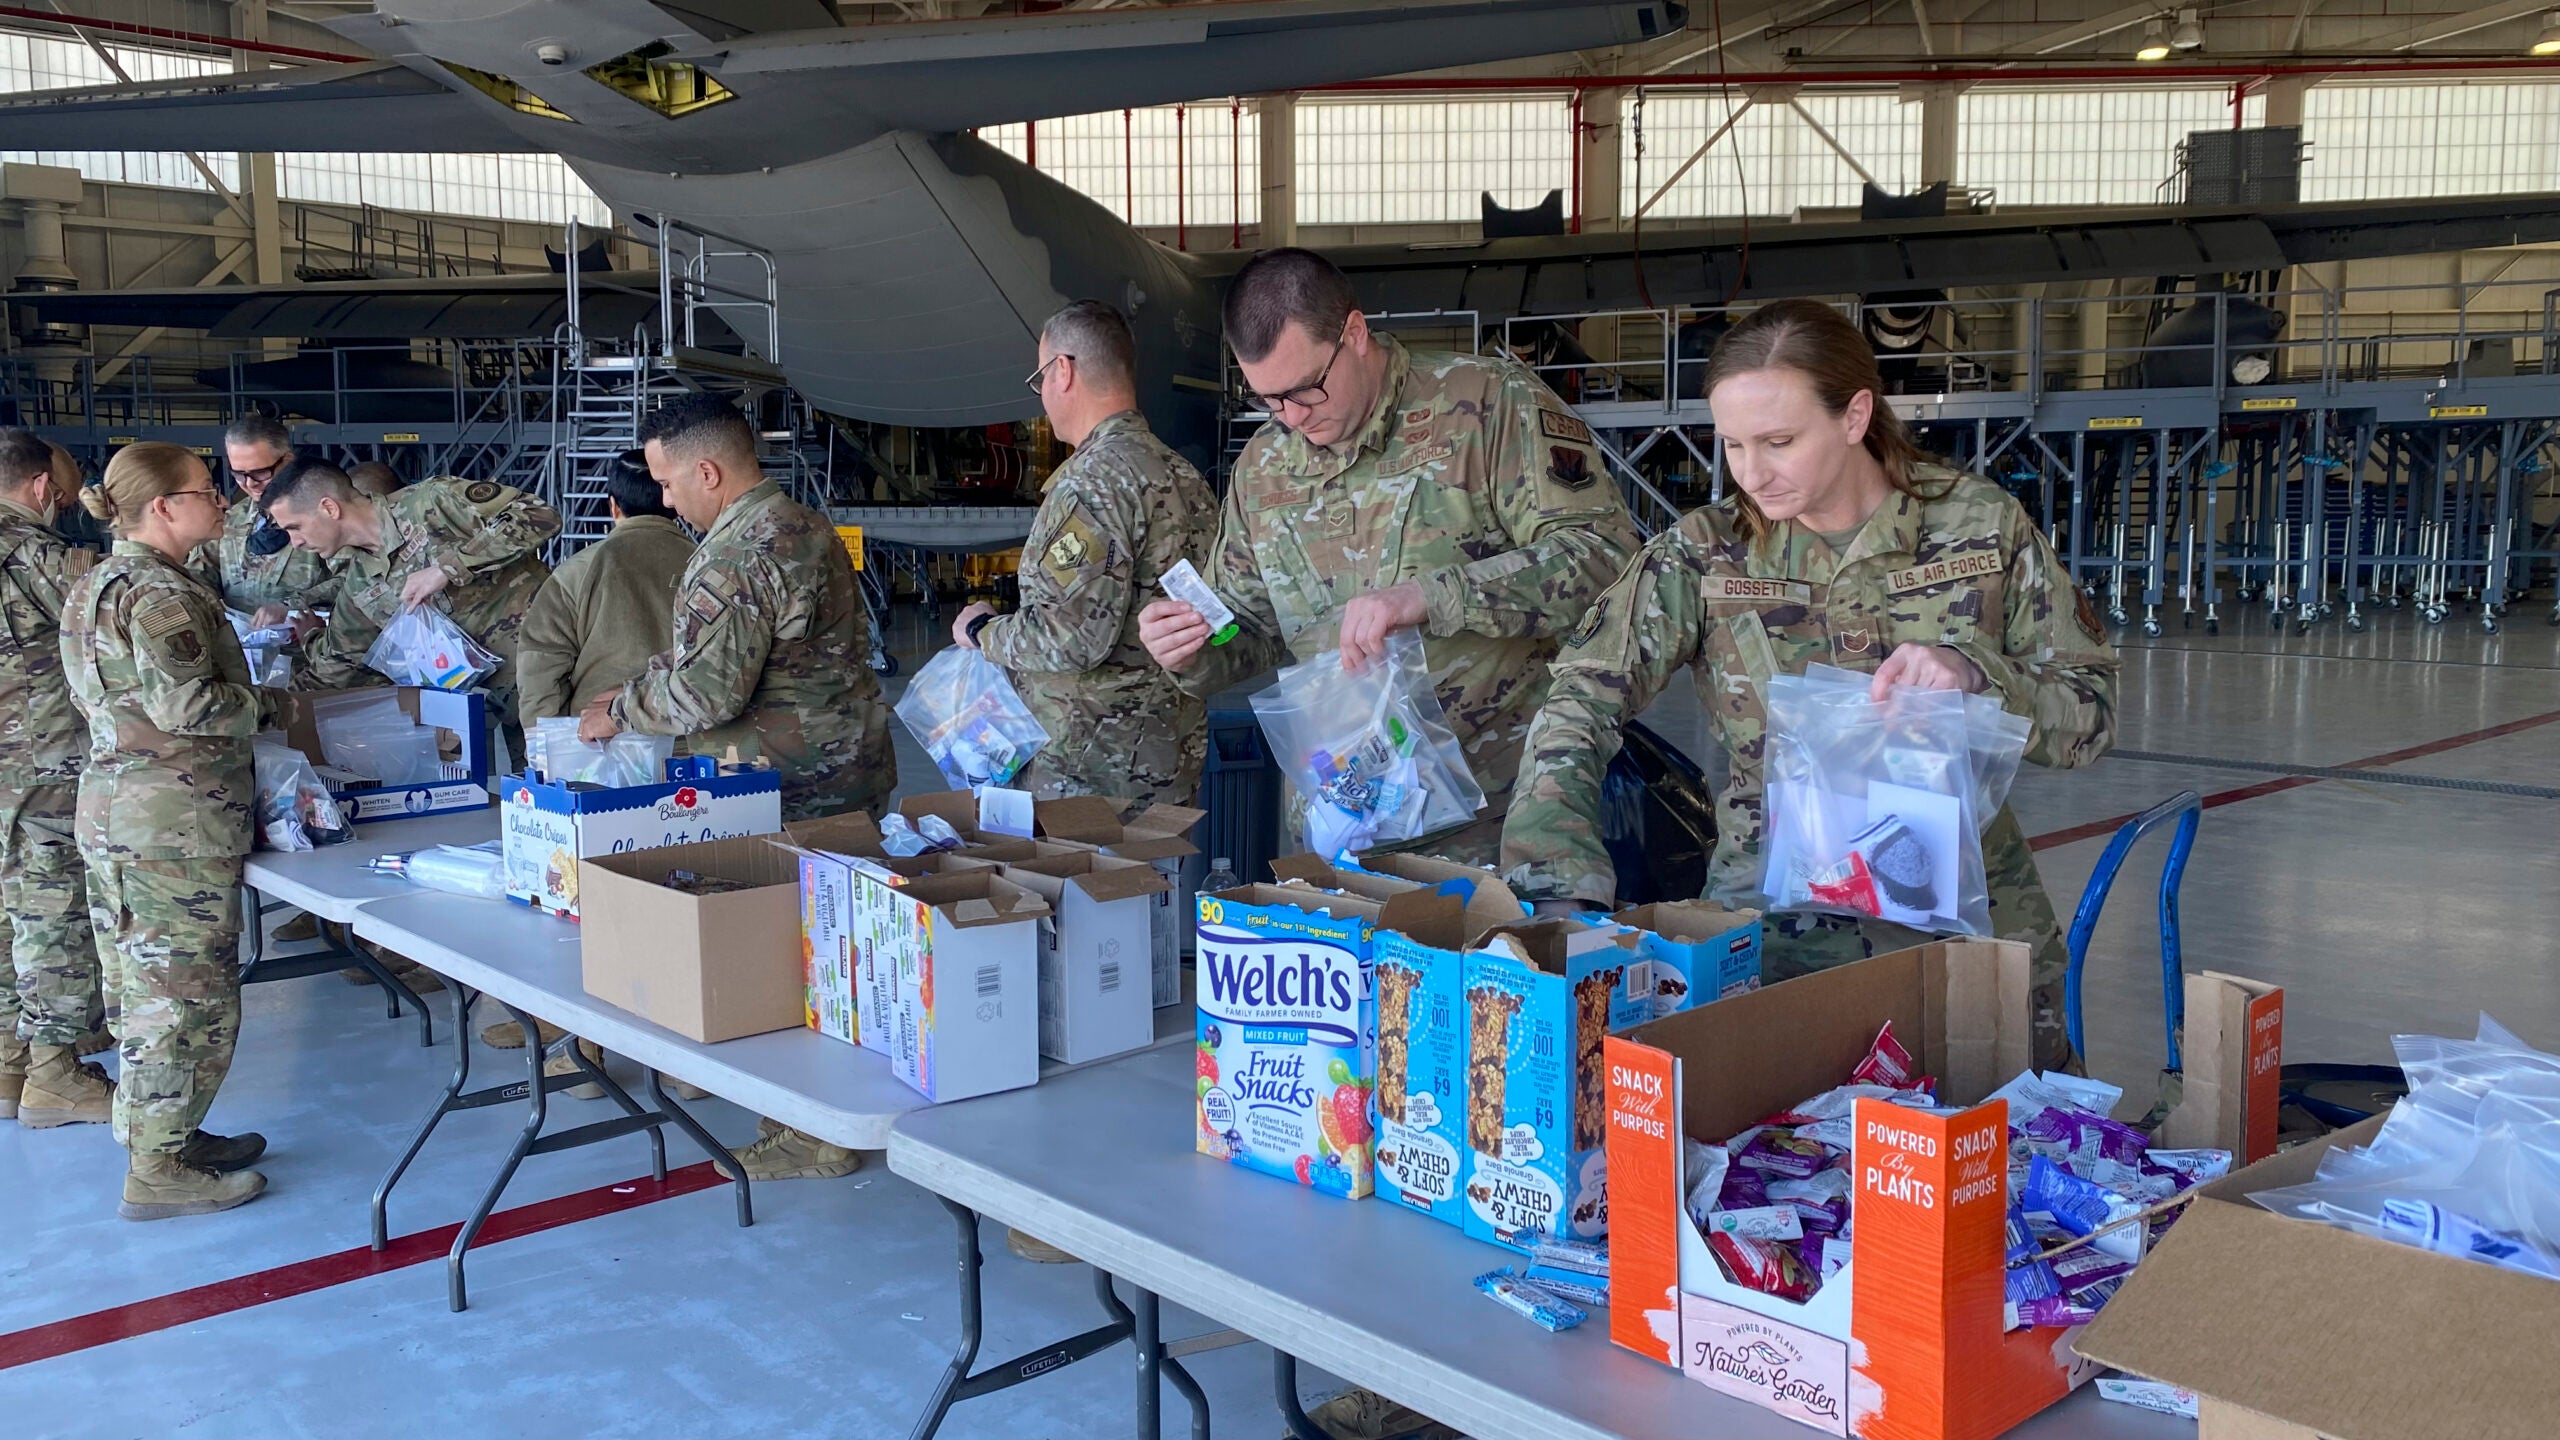 This airman helped gather 1,500 pounds of food and supplies to help Ukraine